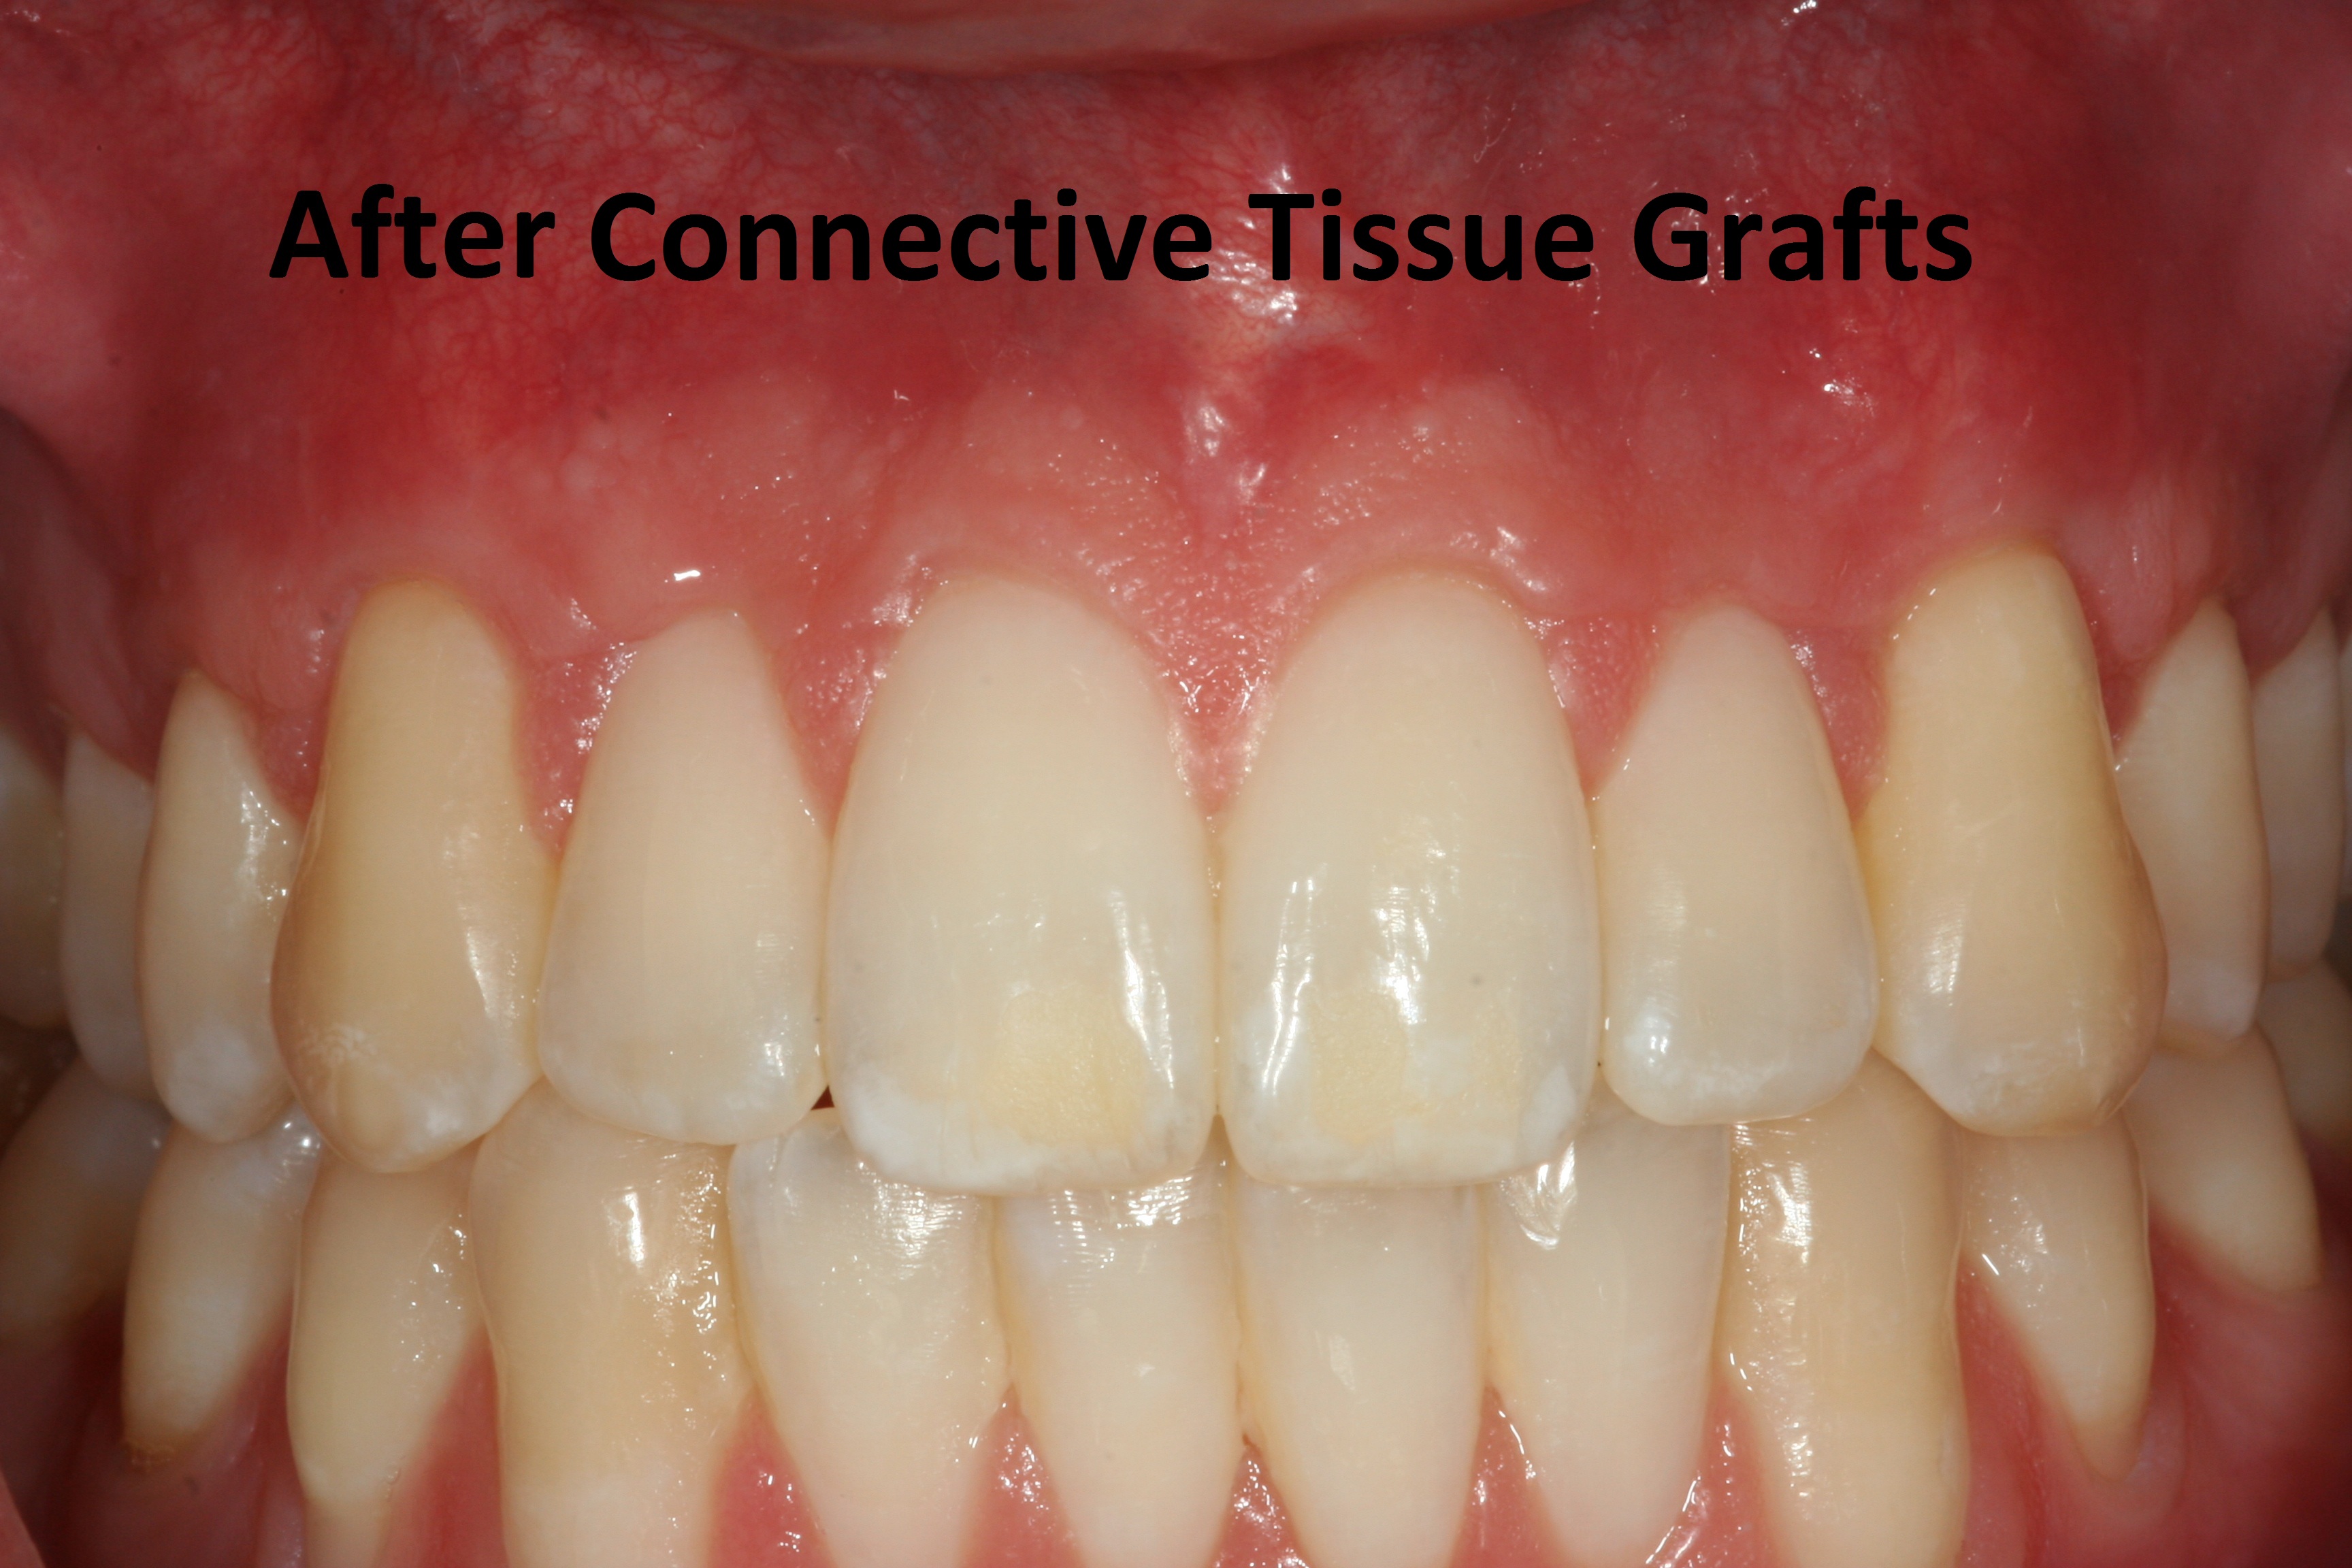 After connective tissue grafts photo